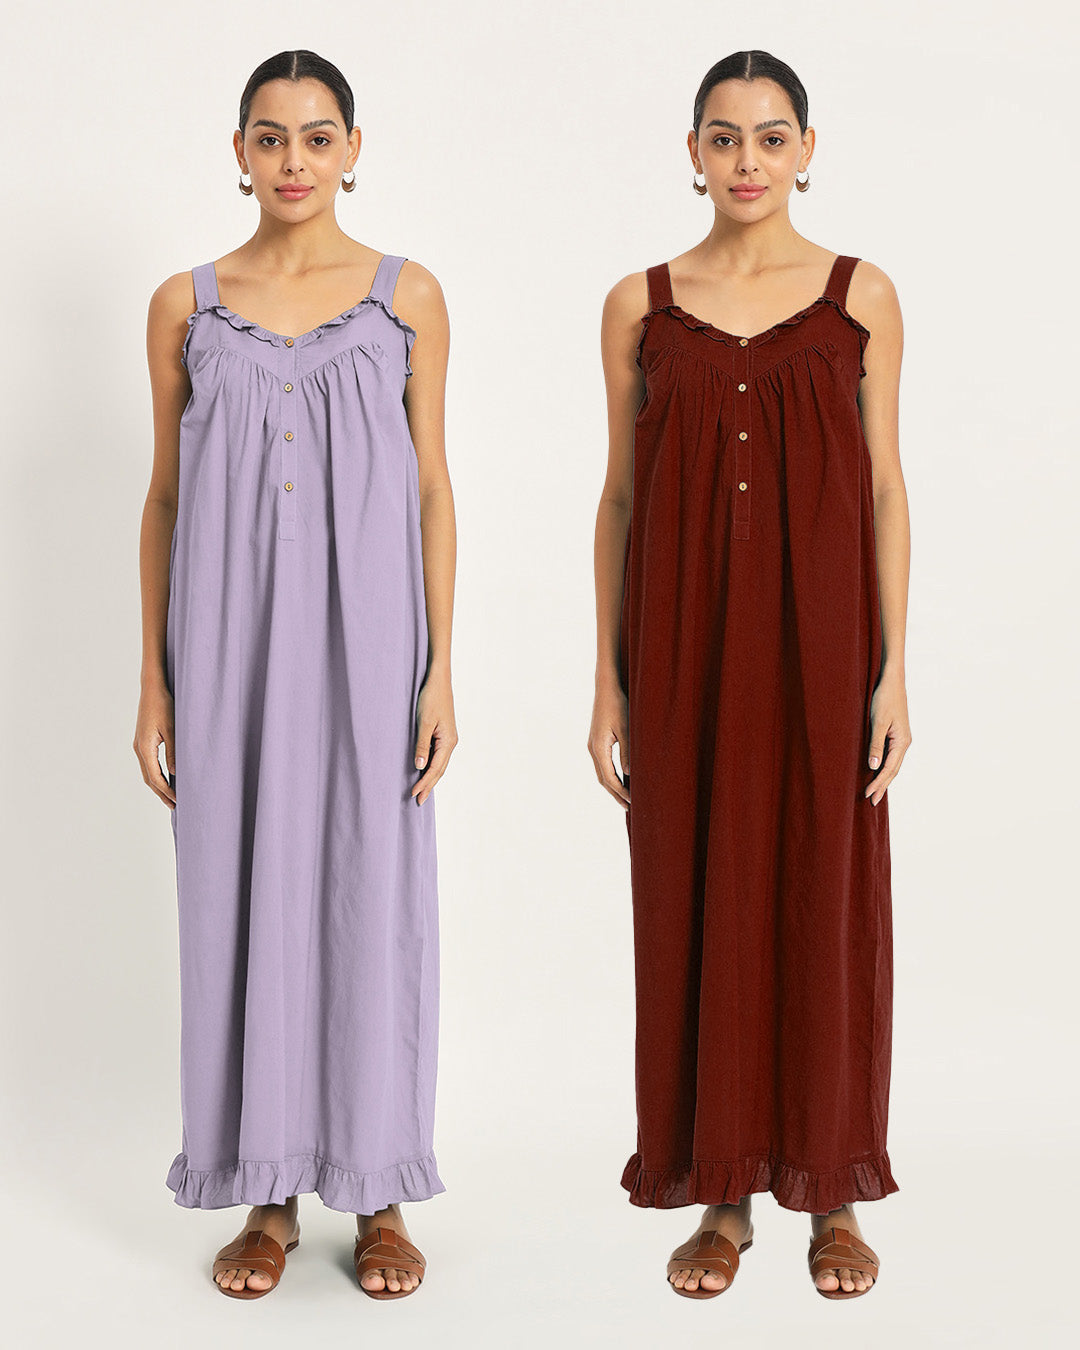 Combo: Lilac & Russet Red Twilight to Noon Nightdress